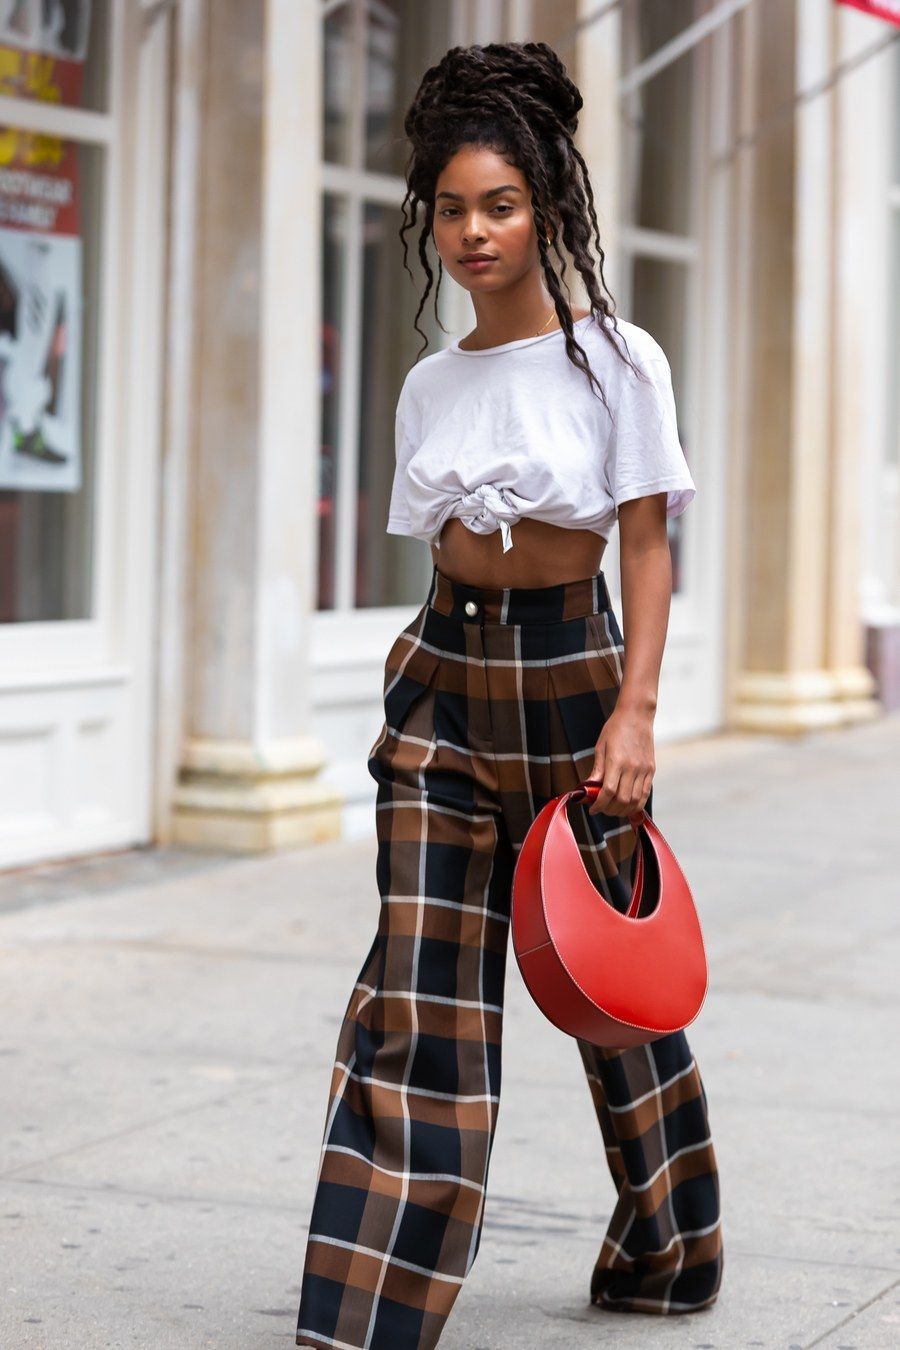 The Best Street Style at New York Fashion Week 2019 | Teen Vogue - The Best Street Style at New York Fashion Week 2019 | Teen Vogue -   18 style Street new york ideas